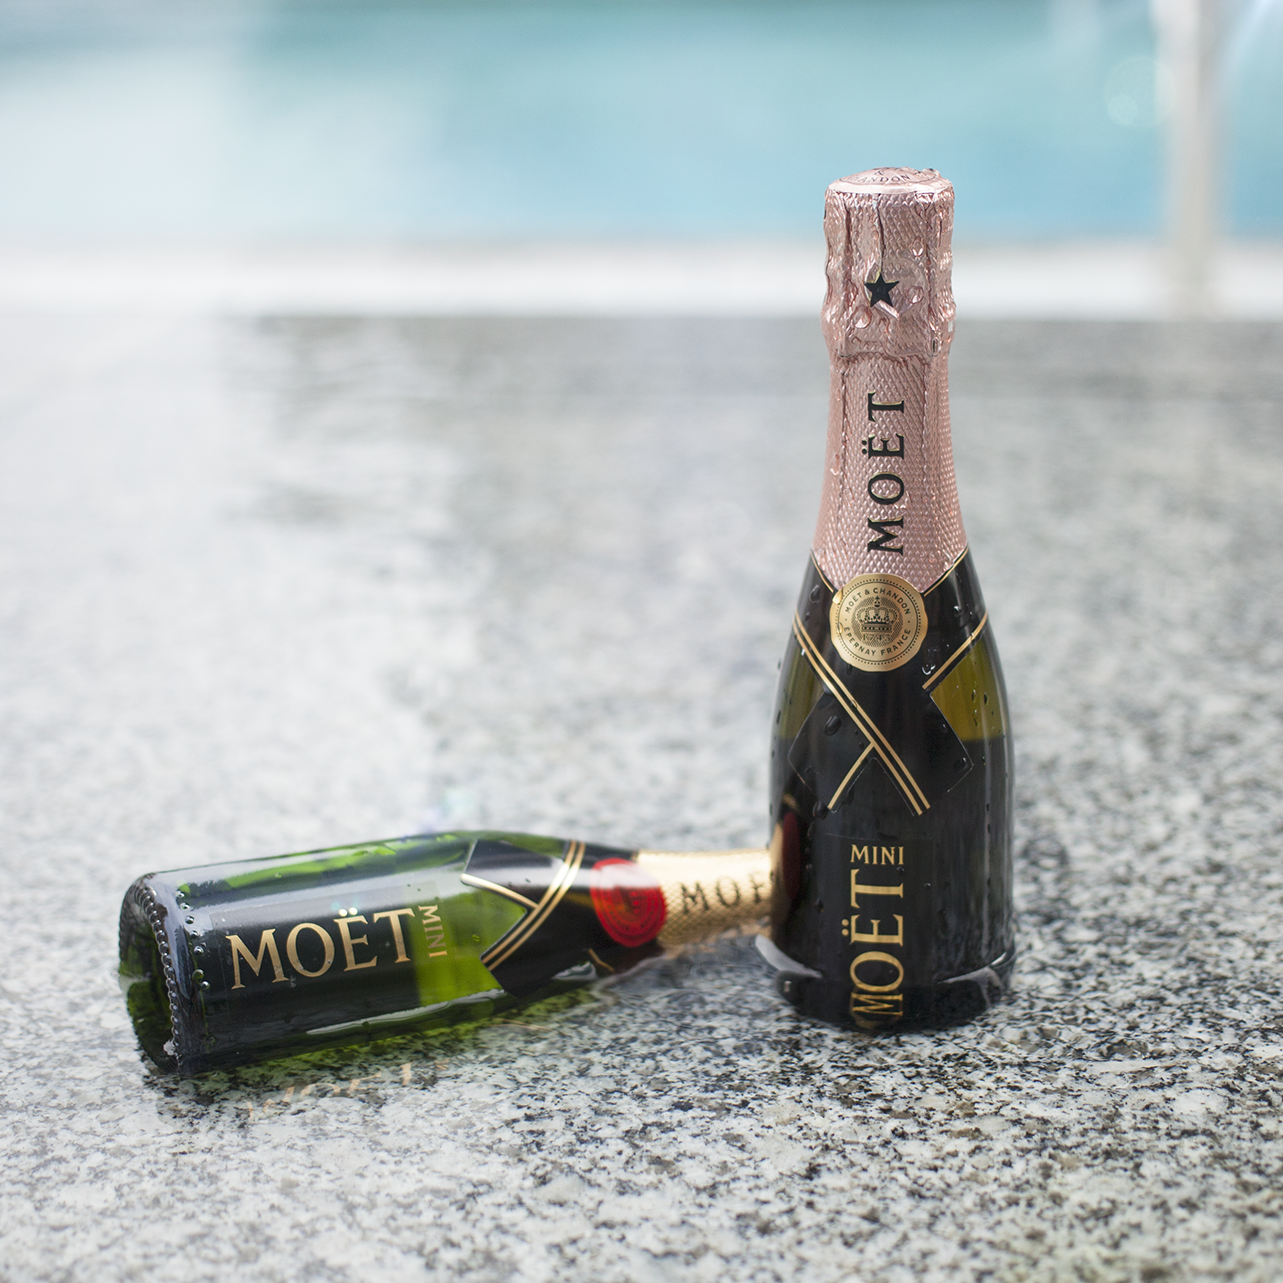 OMG Moët Now Sells Mini Bottles of Champagne by the 6-Pack Like